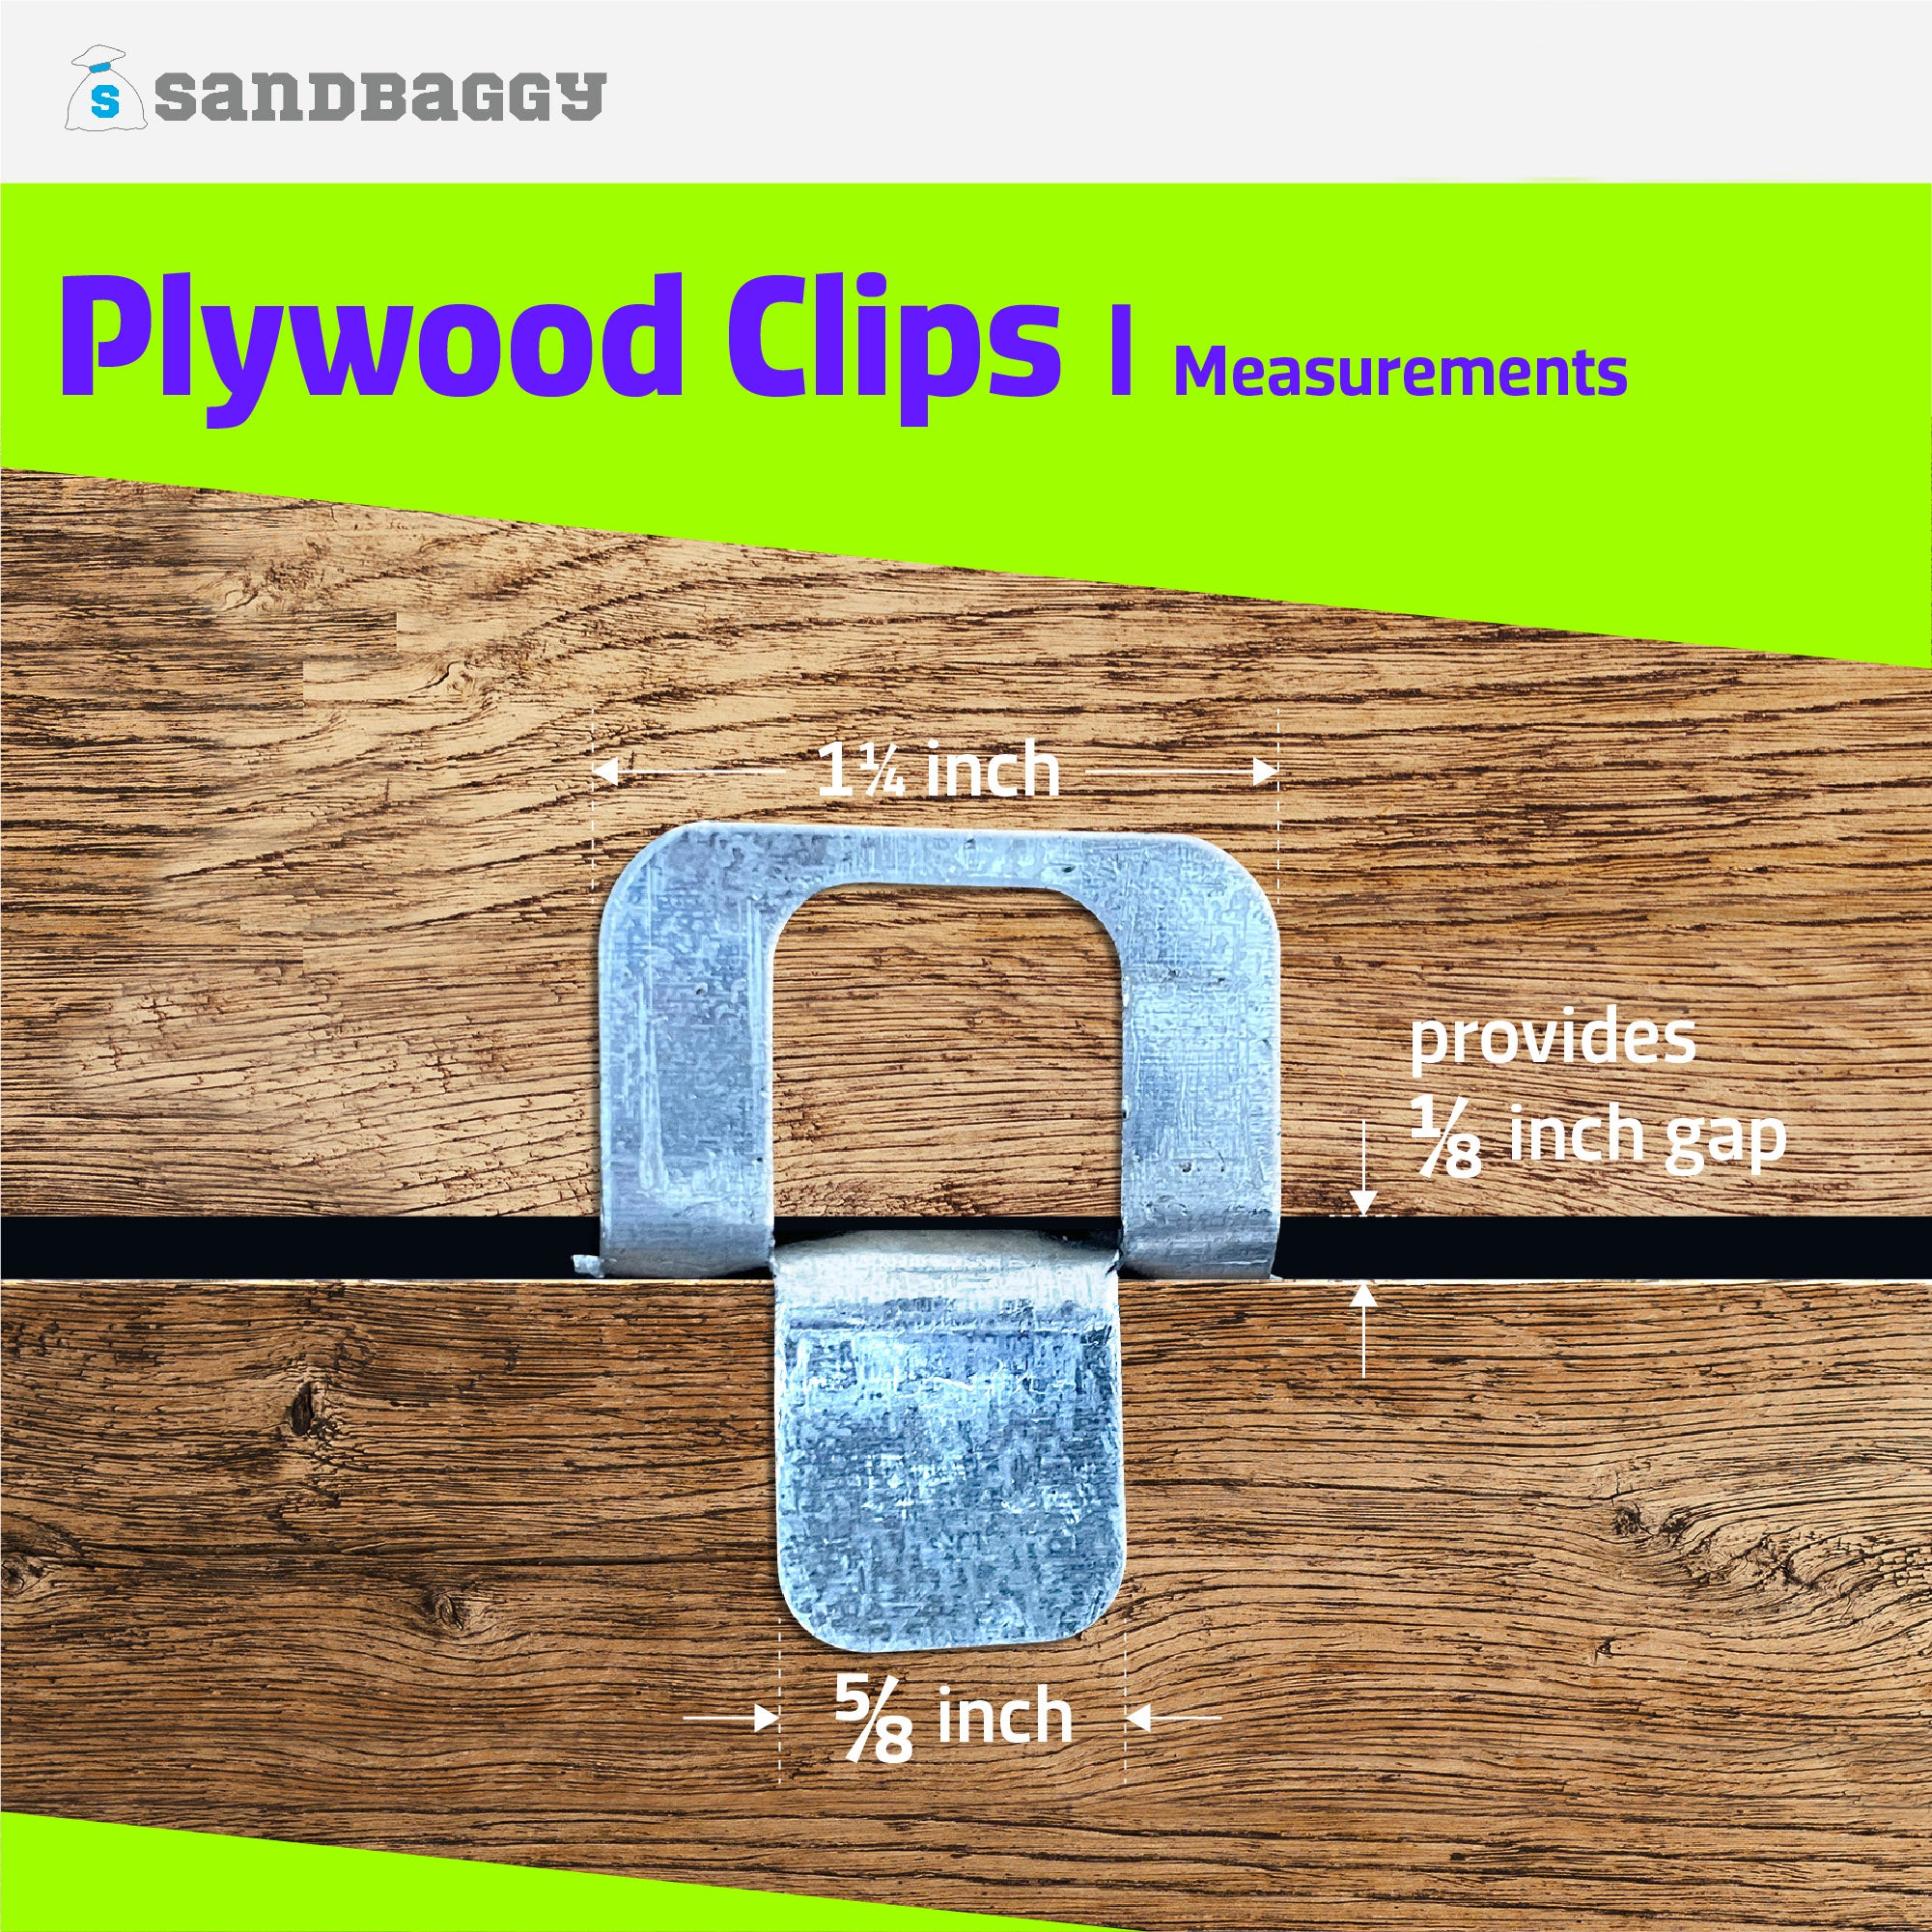 Plywood H Clips For Roofing - Panel Sheathing - Sandbaggy